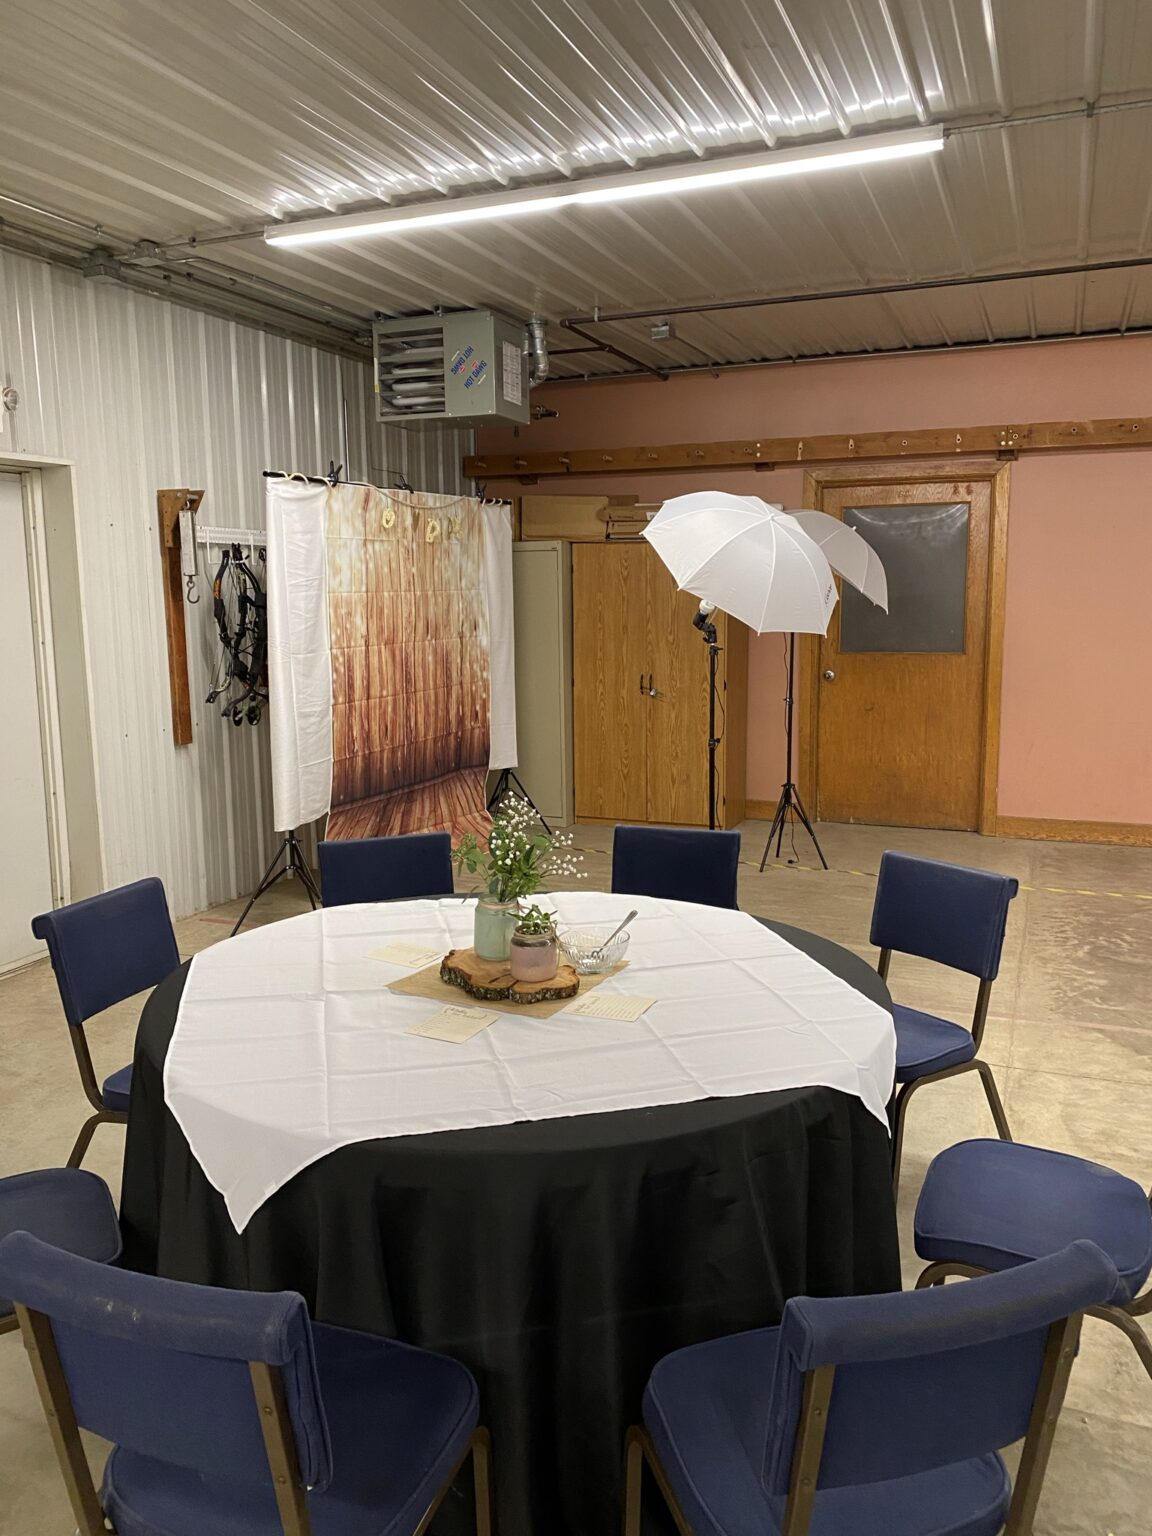 View of photo area fits in the space with the various tables.